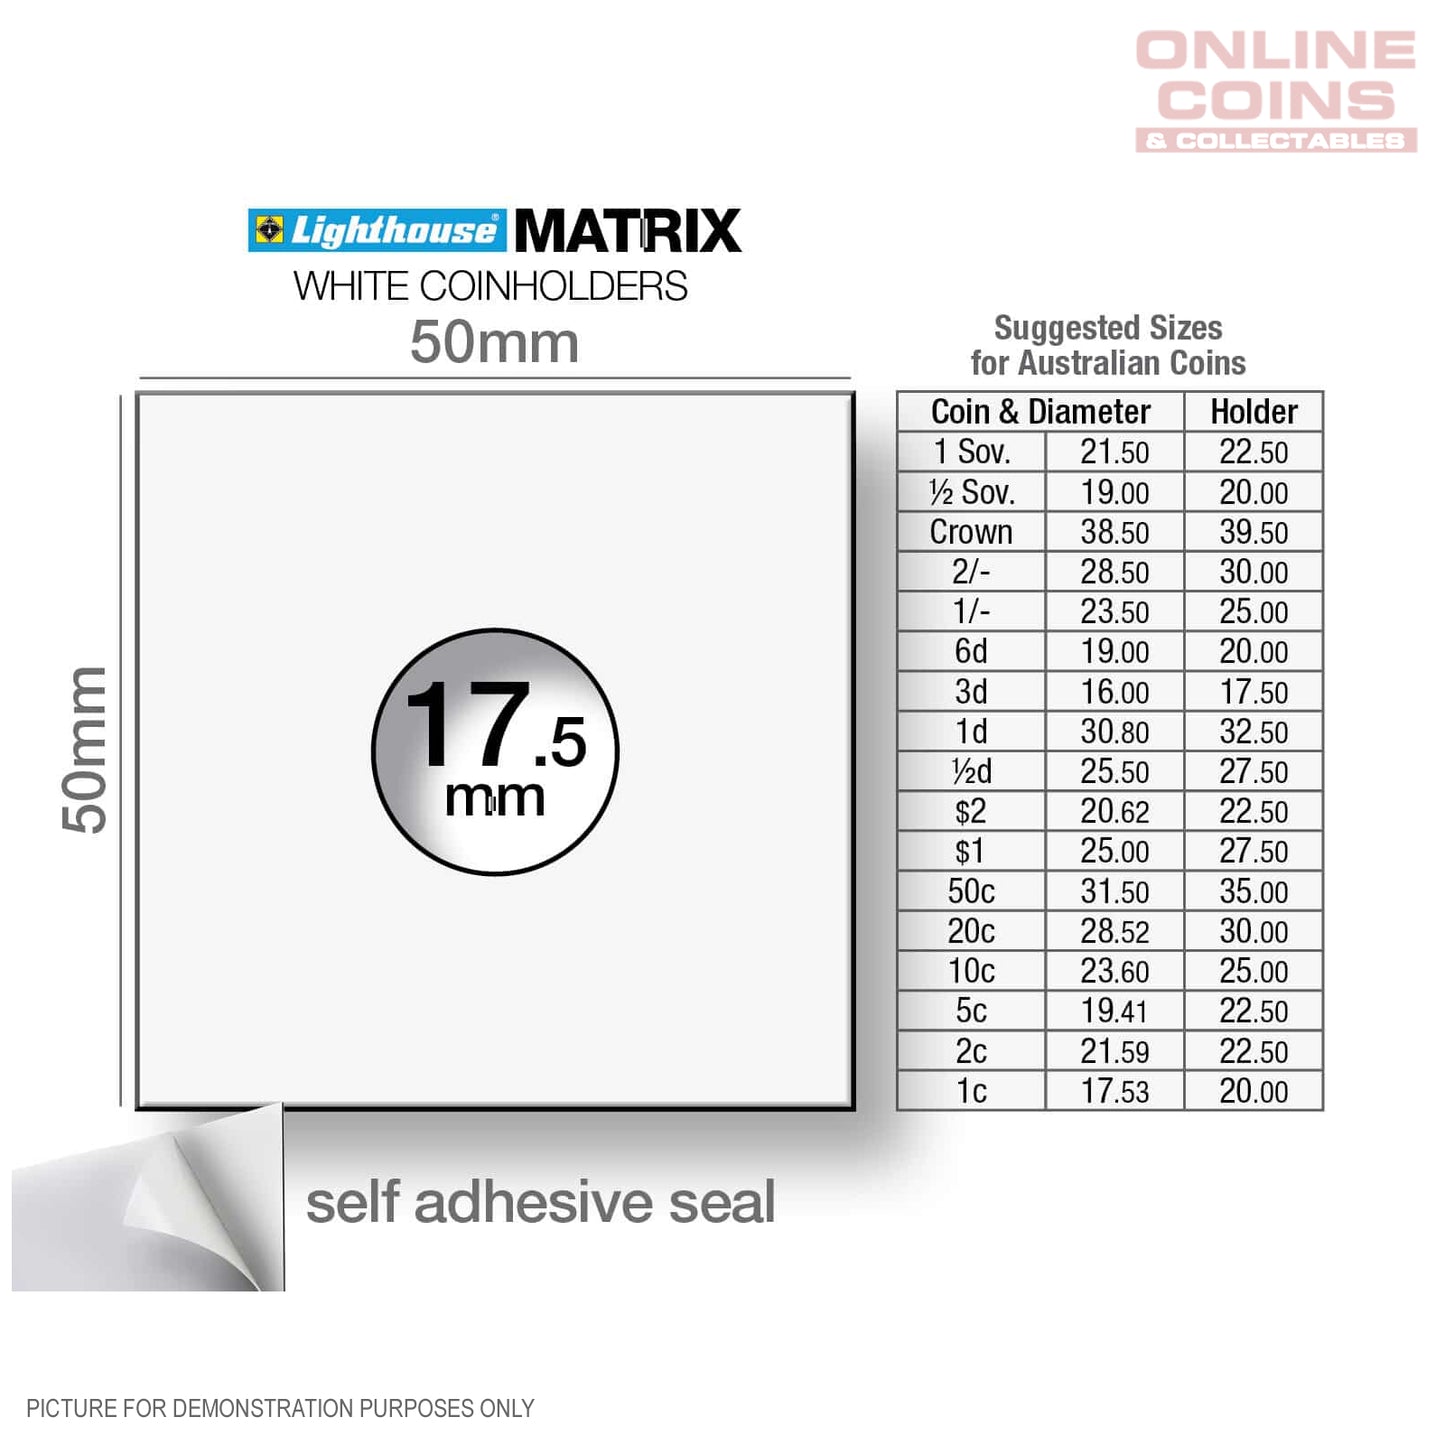 Lighthouse MATRIX WHITE Self Adhesive Coin Holders x 100, 17.5 mm Pack of 100 (Suitable For Australian Threepence Coins)